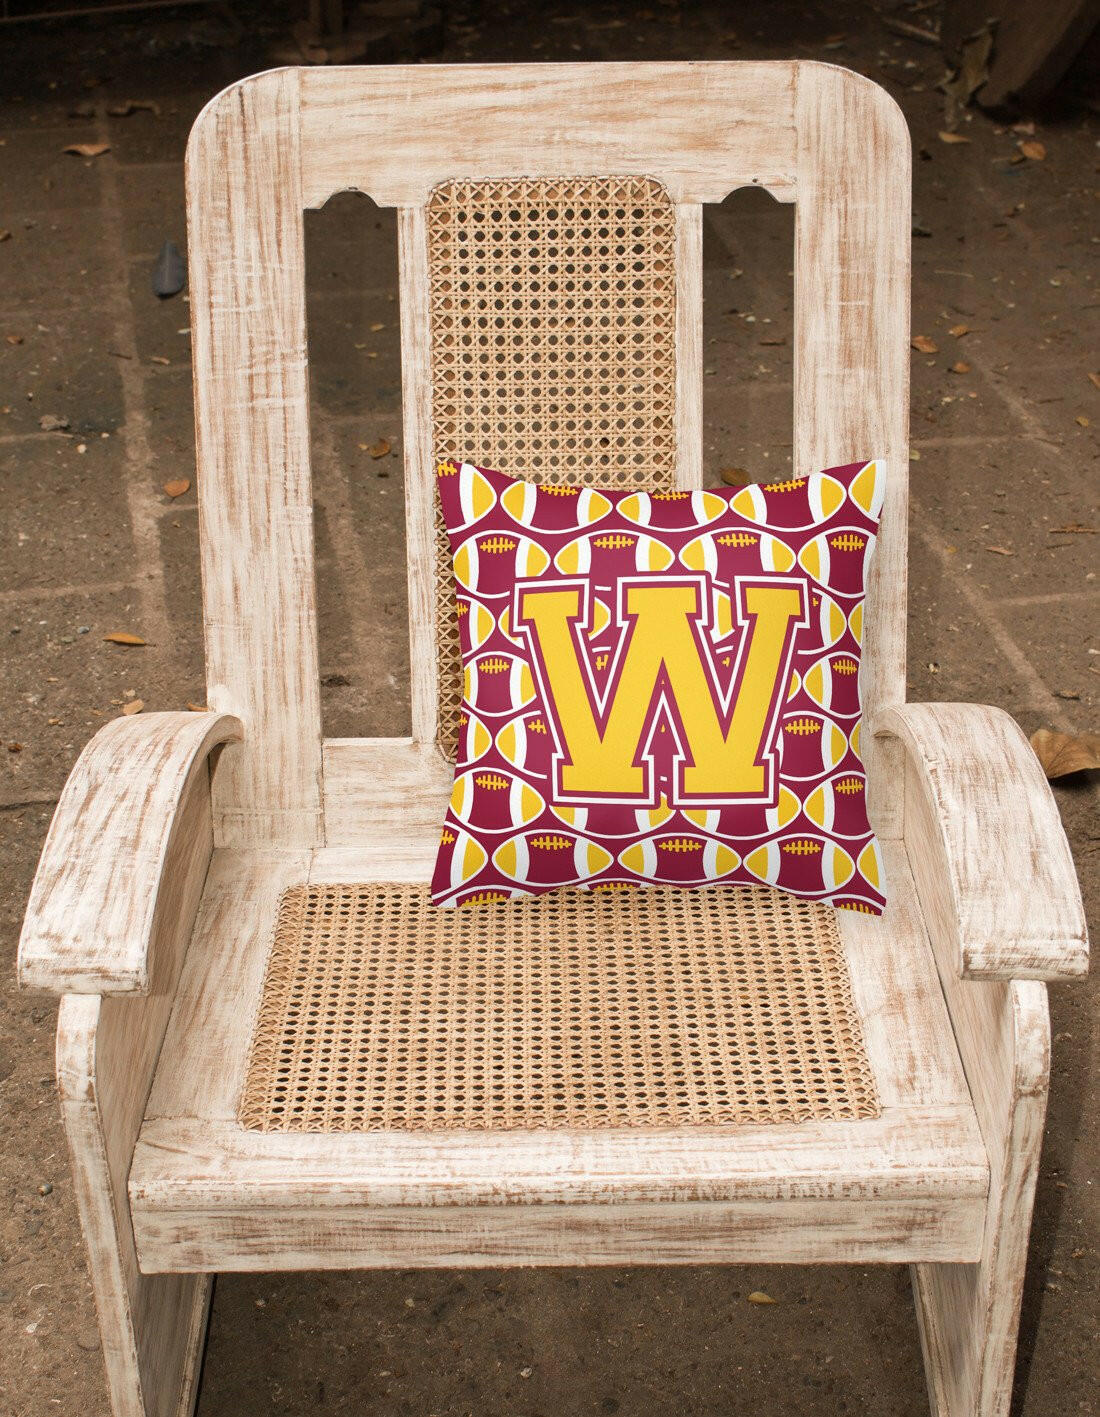 Letter W Football Maroon and Gold Fabric Decorative Pillow CJ1081-WPW1414 by Caroline's Treasures